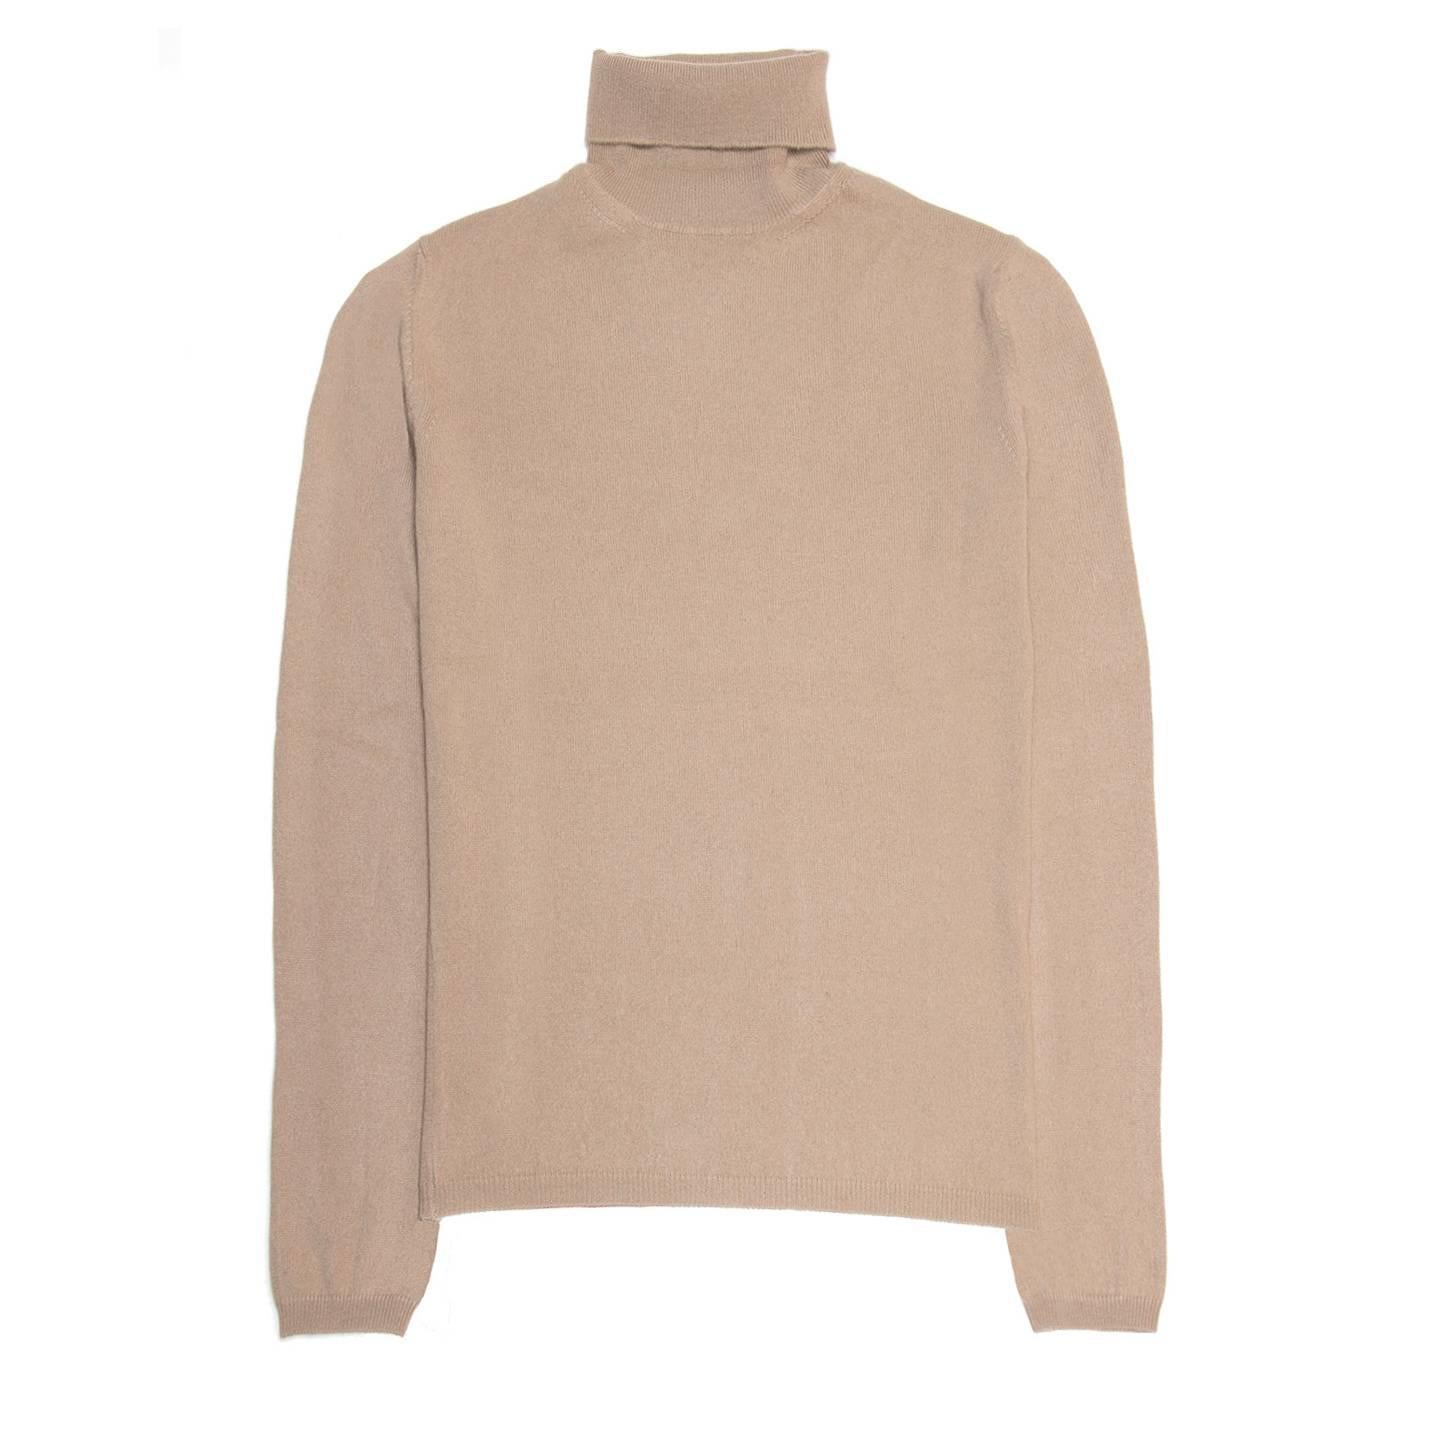 Light brown color cashmere knit rollover turtleneck.

Size  42 French sizing

Condition  Excellent: worn once
 